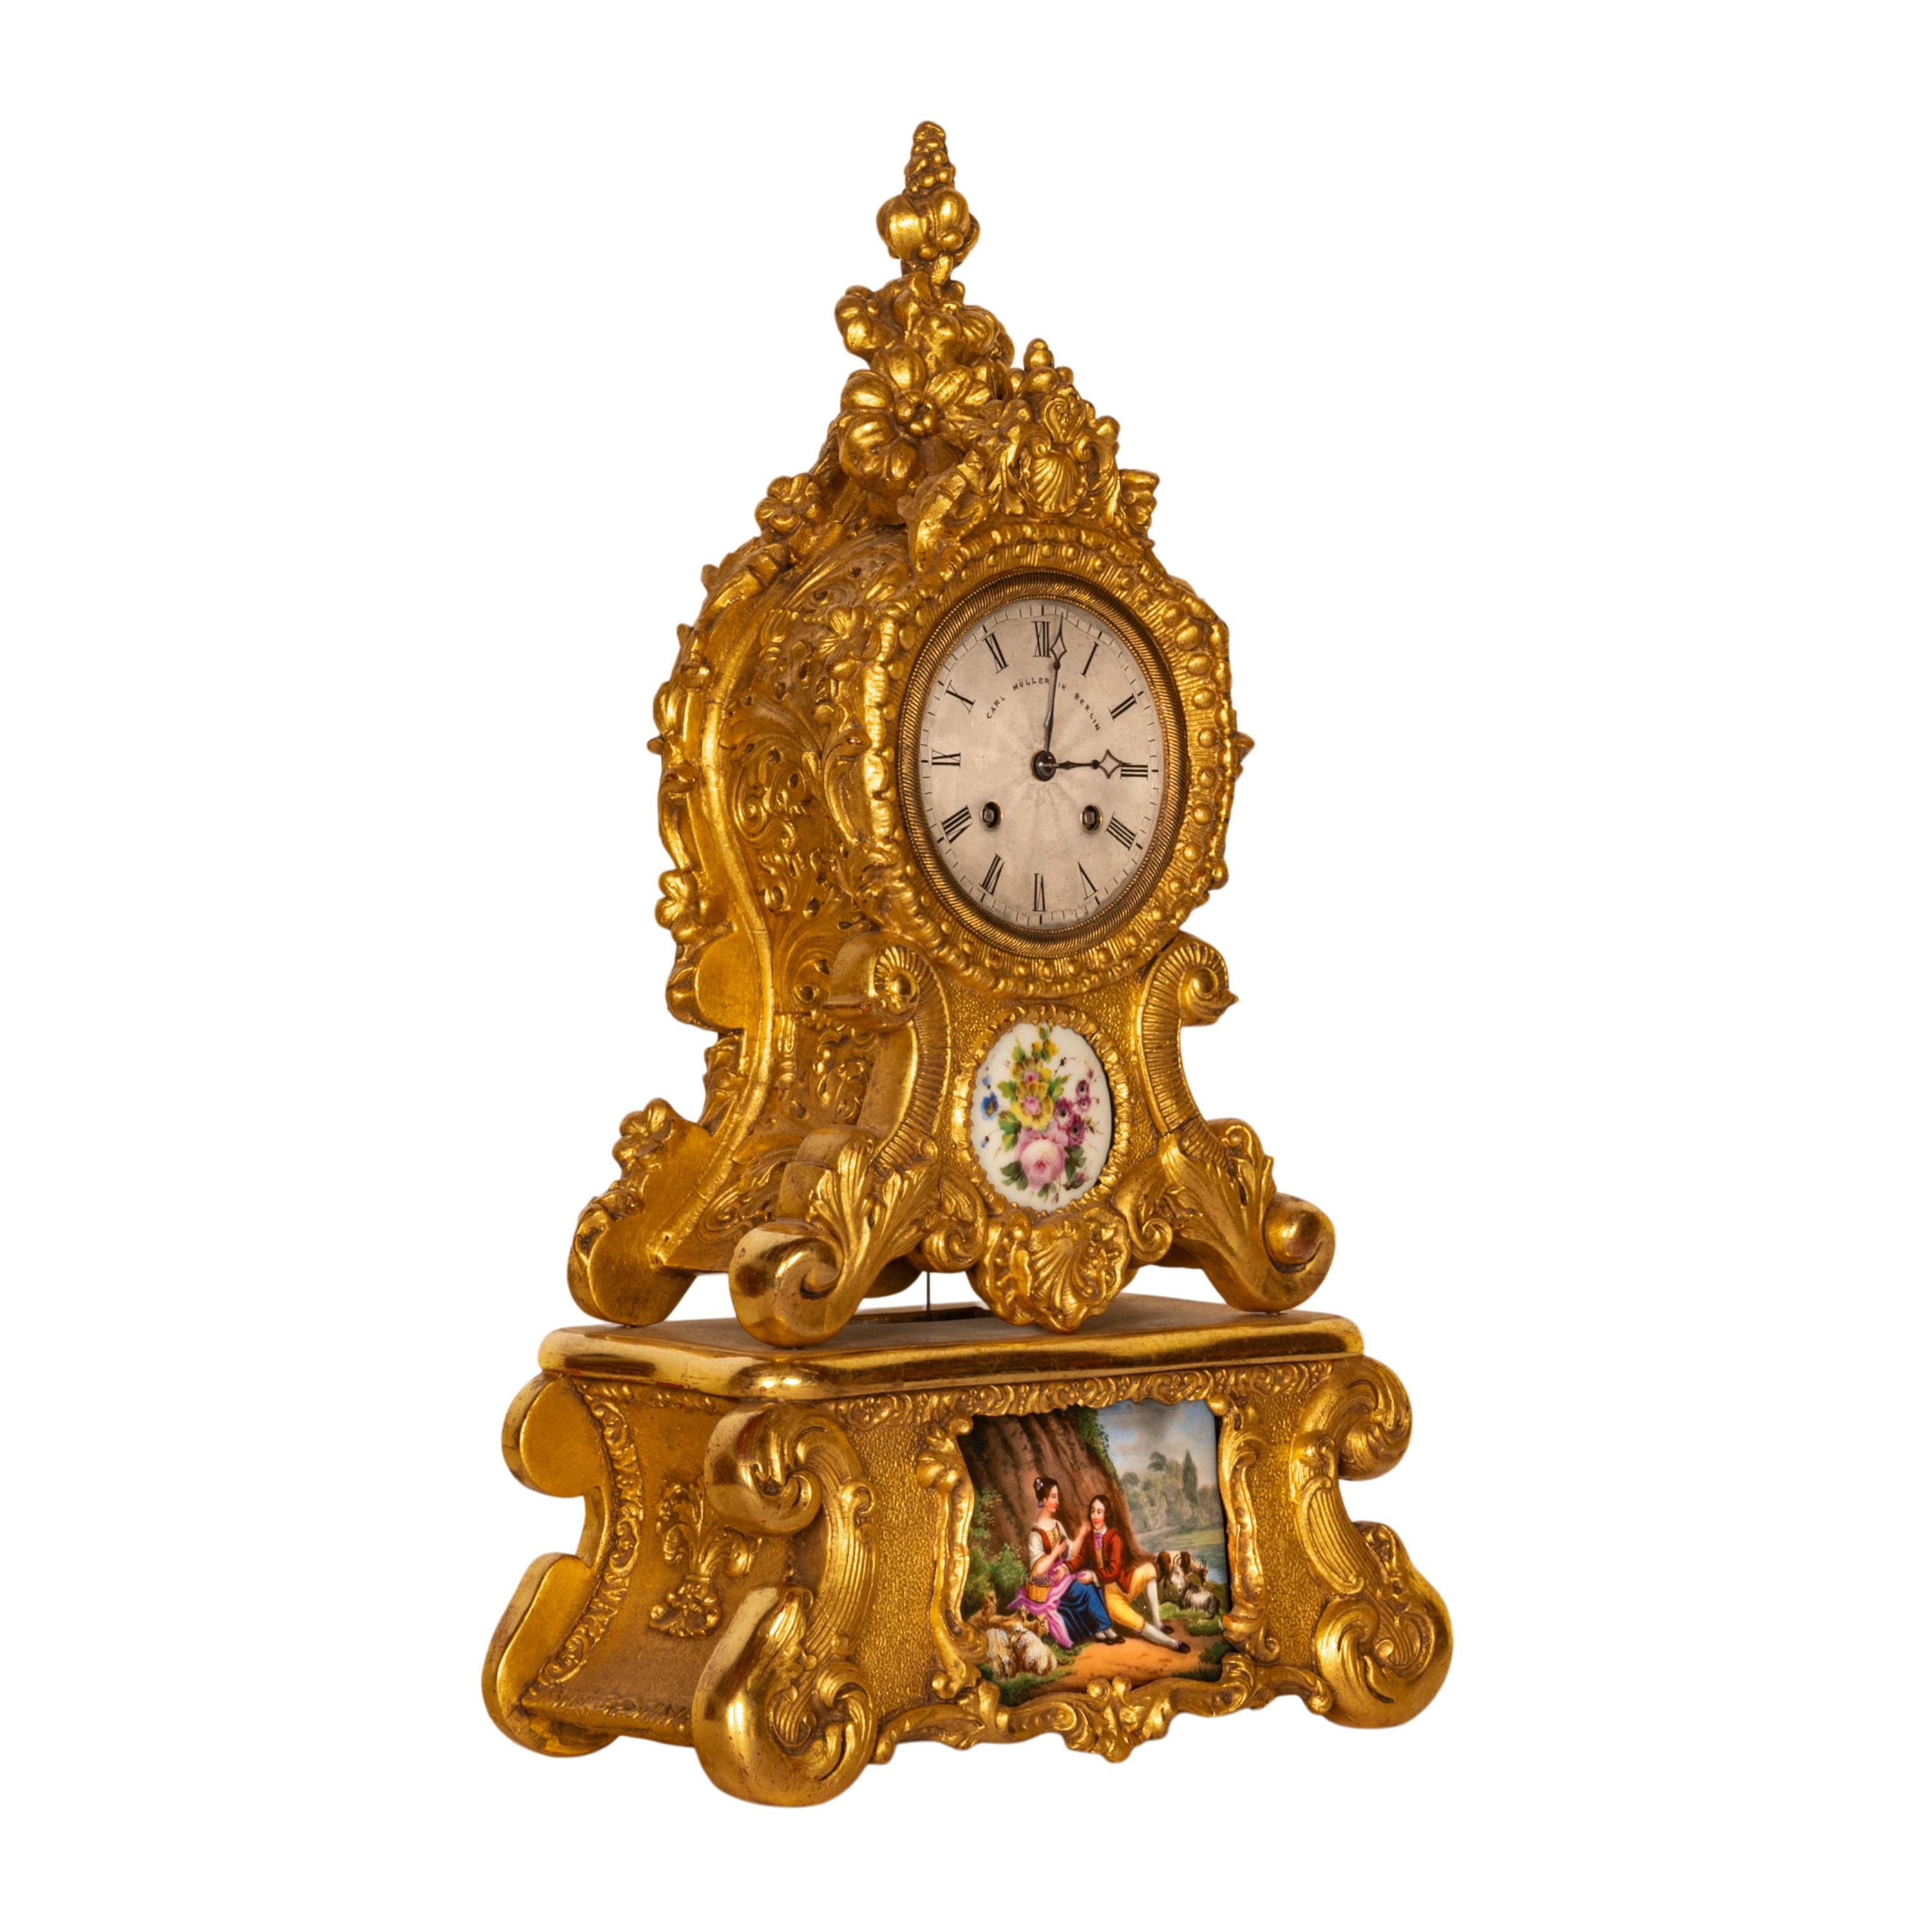 A fine antique French eight day mantle clock, gilded and fitted with Sevres porcelain plaques, circa 1830.
An early French silk suspension clock, with an eight day time and strike movement, gently sounding the hours and half hour on a bell. The